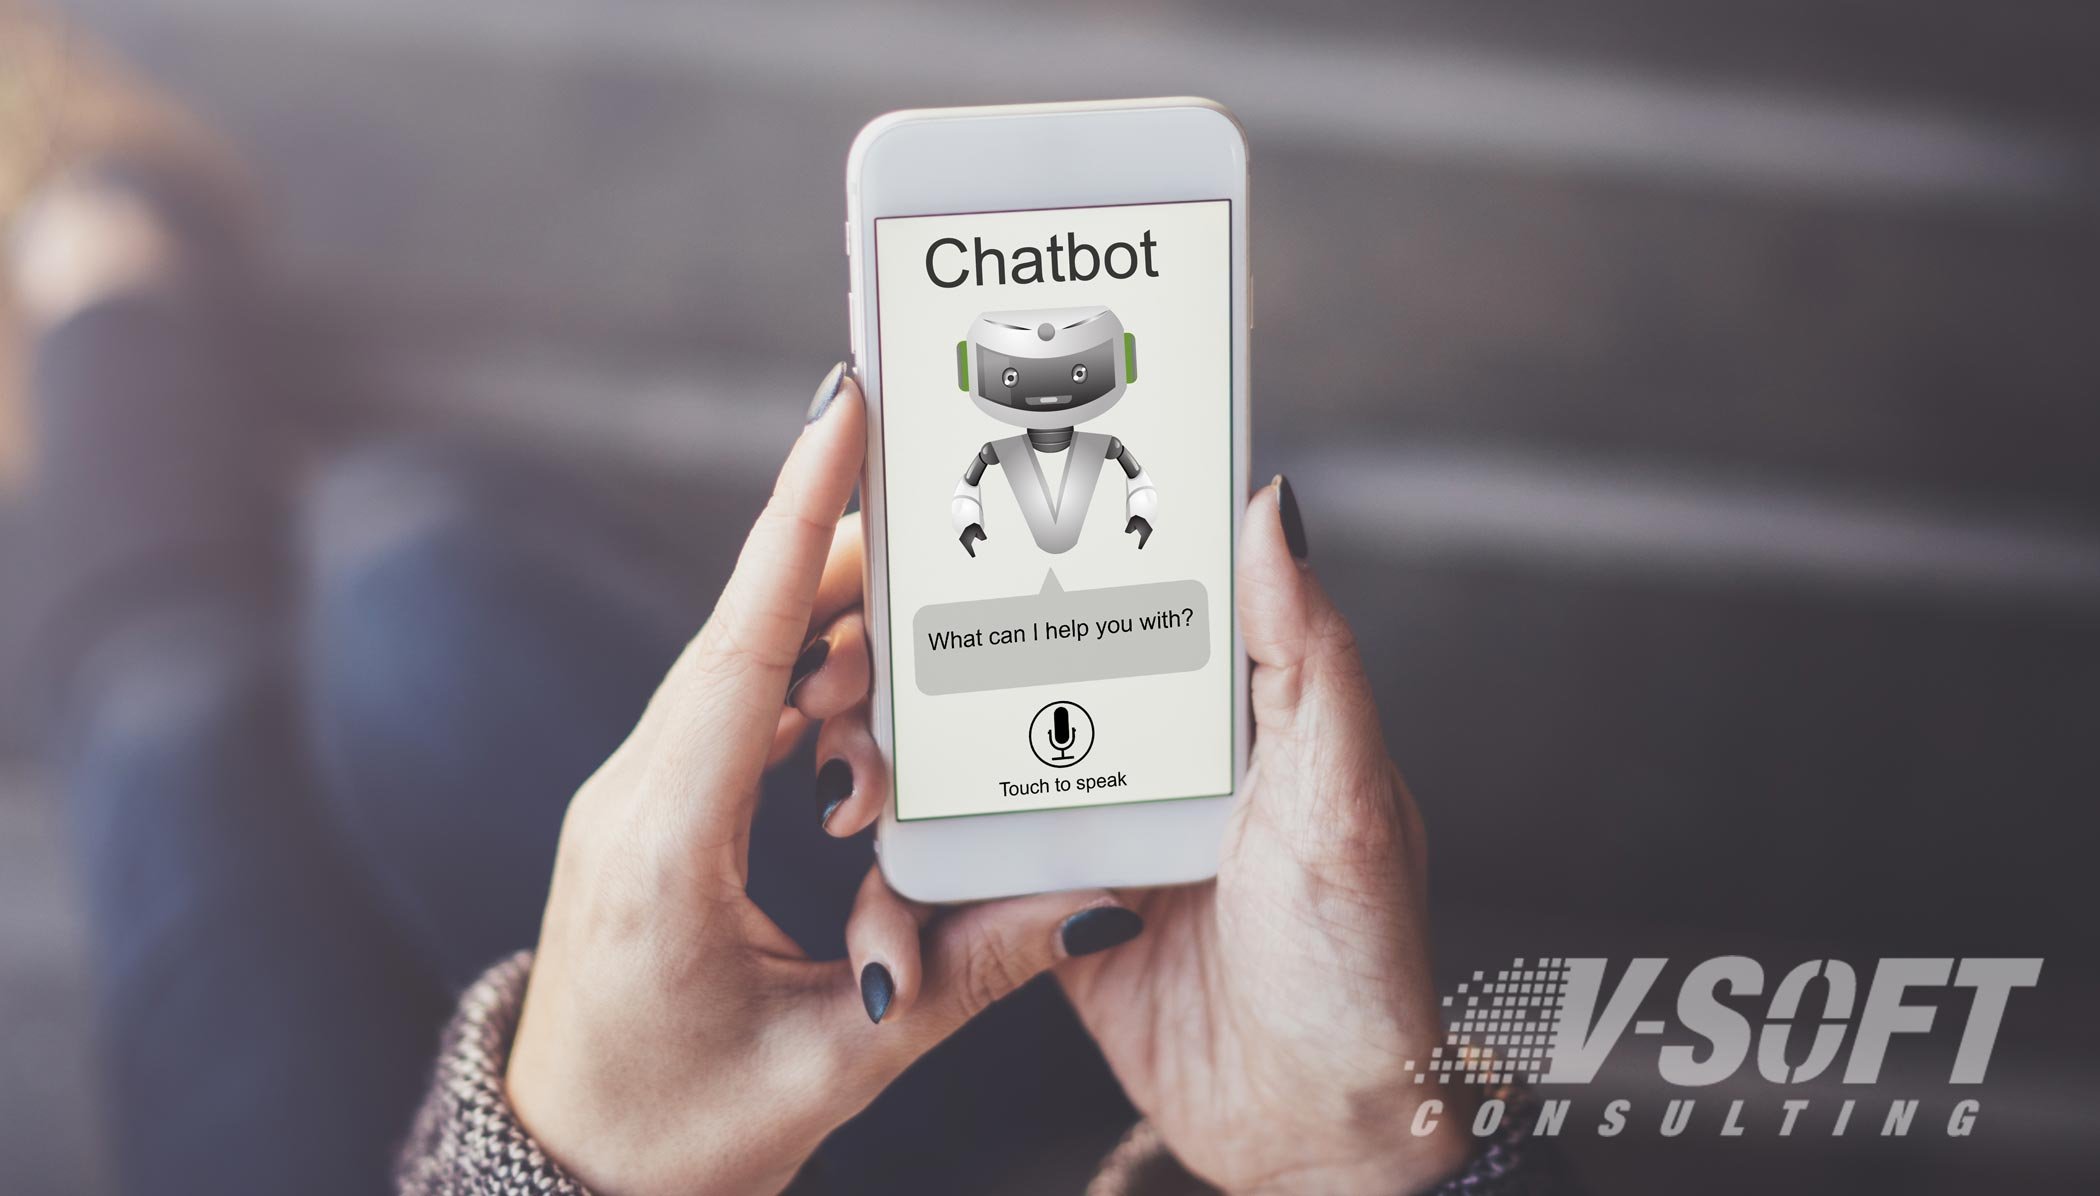 List of Considerations Not to Miss in Chatbot Design